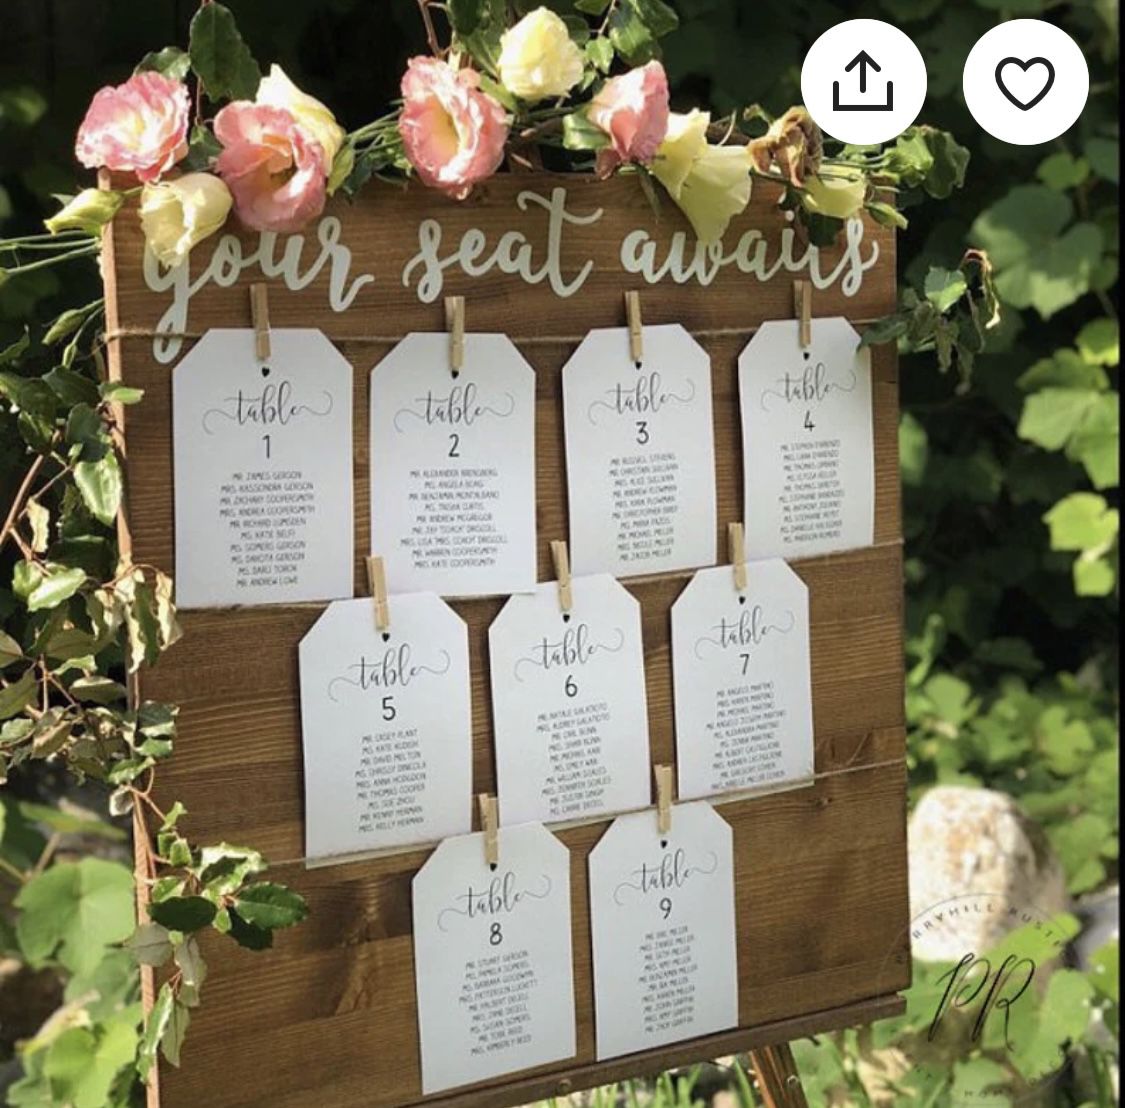 Hand Crafted Wooden Wedding Sign, Seating Chart, 16x18 “Your Seat Awaits”